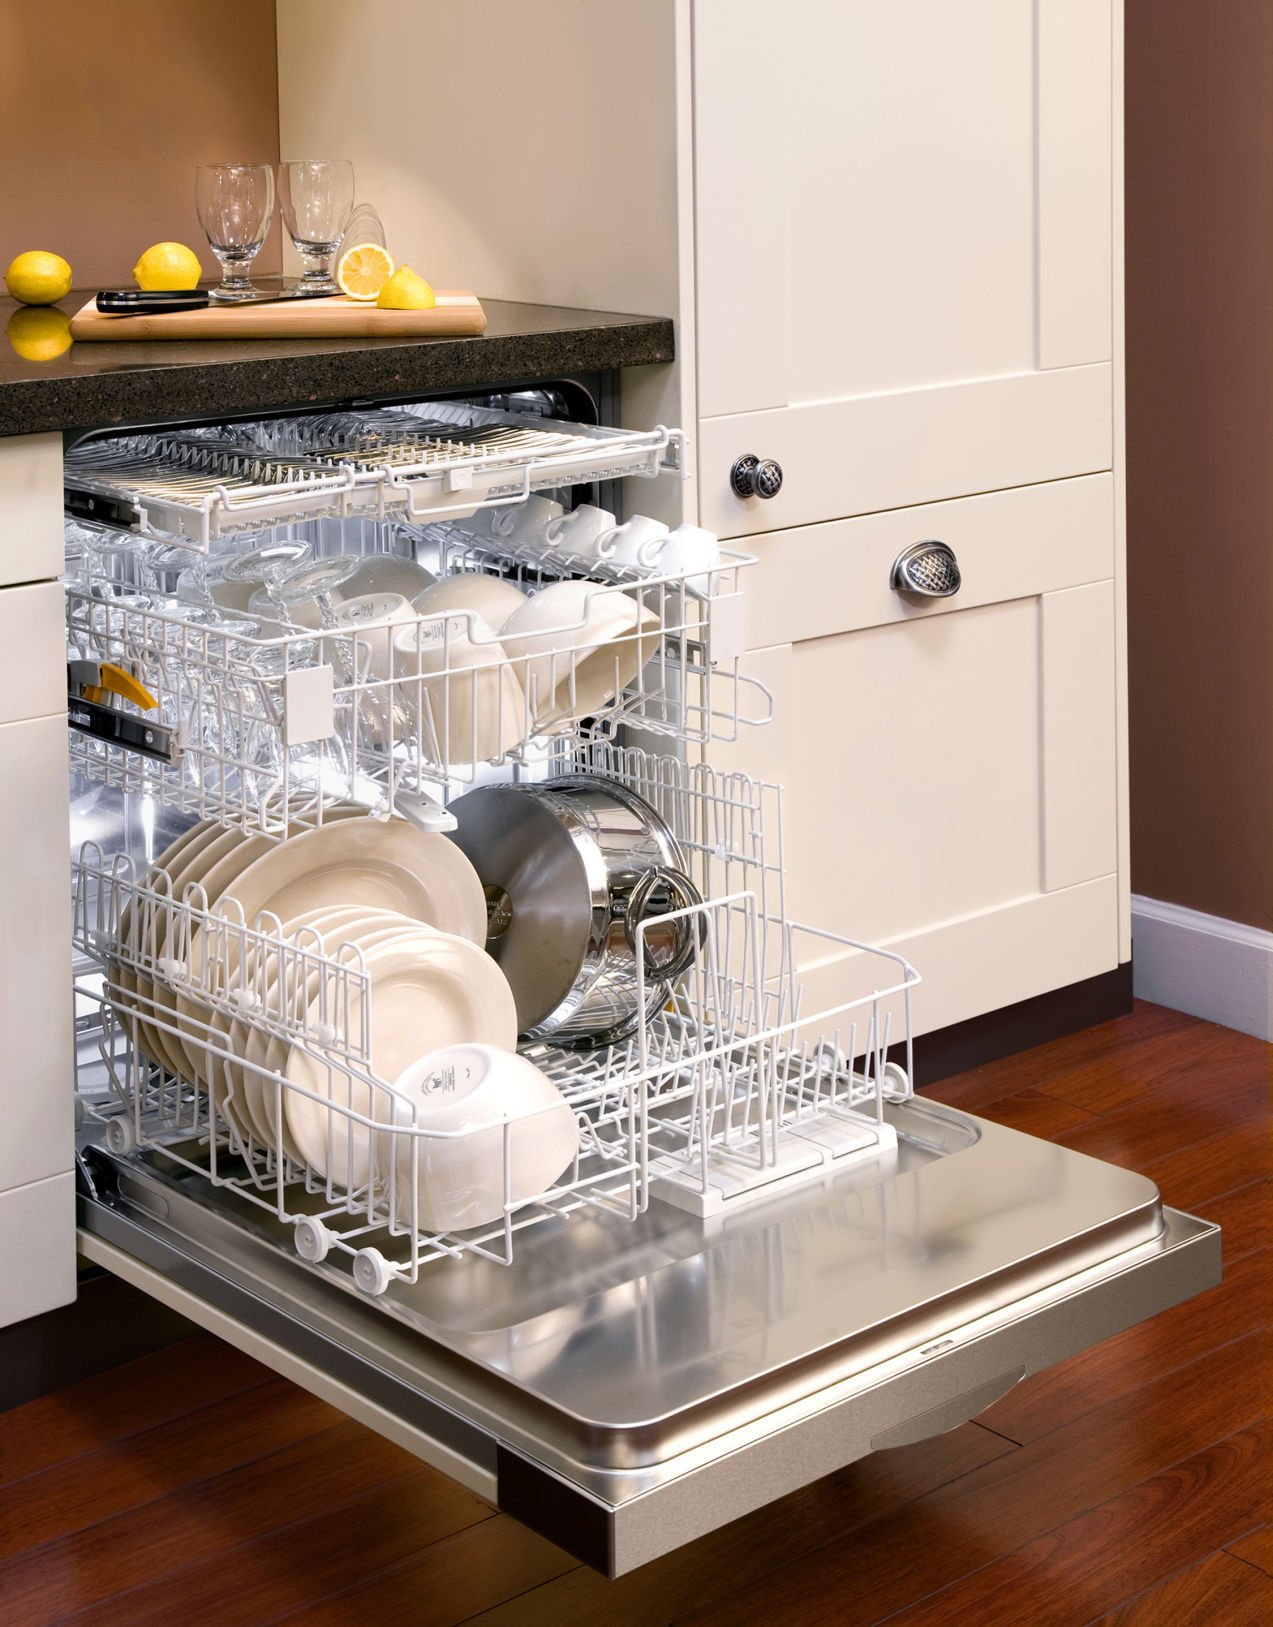 New dishwasher will be way more 